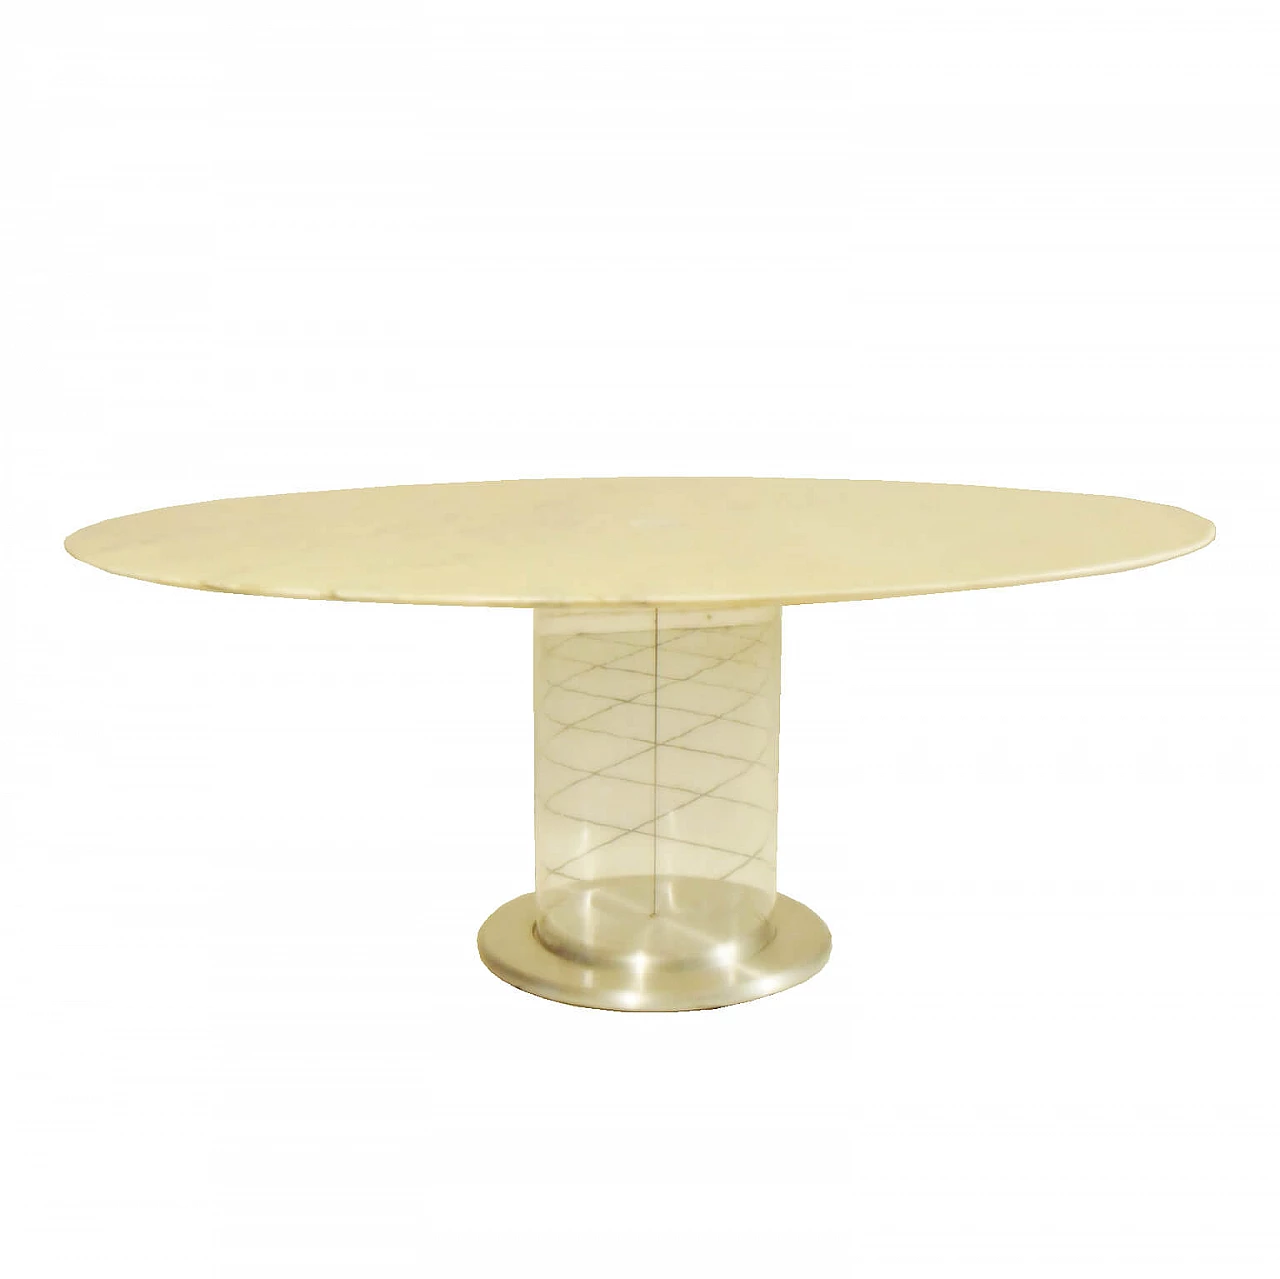 1970s Dining Table, White Marble, Lucite Base, Claudio Salocchi for Sormani Italy 1069598